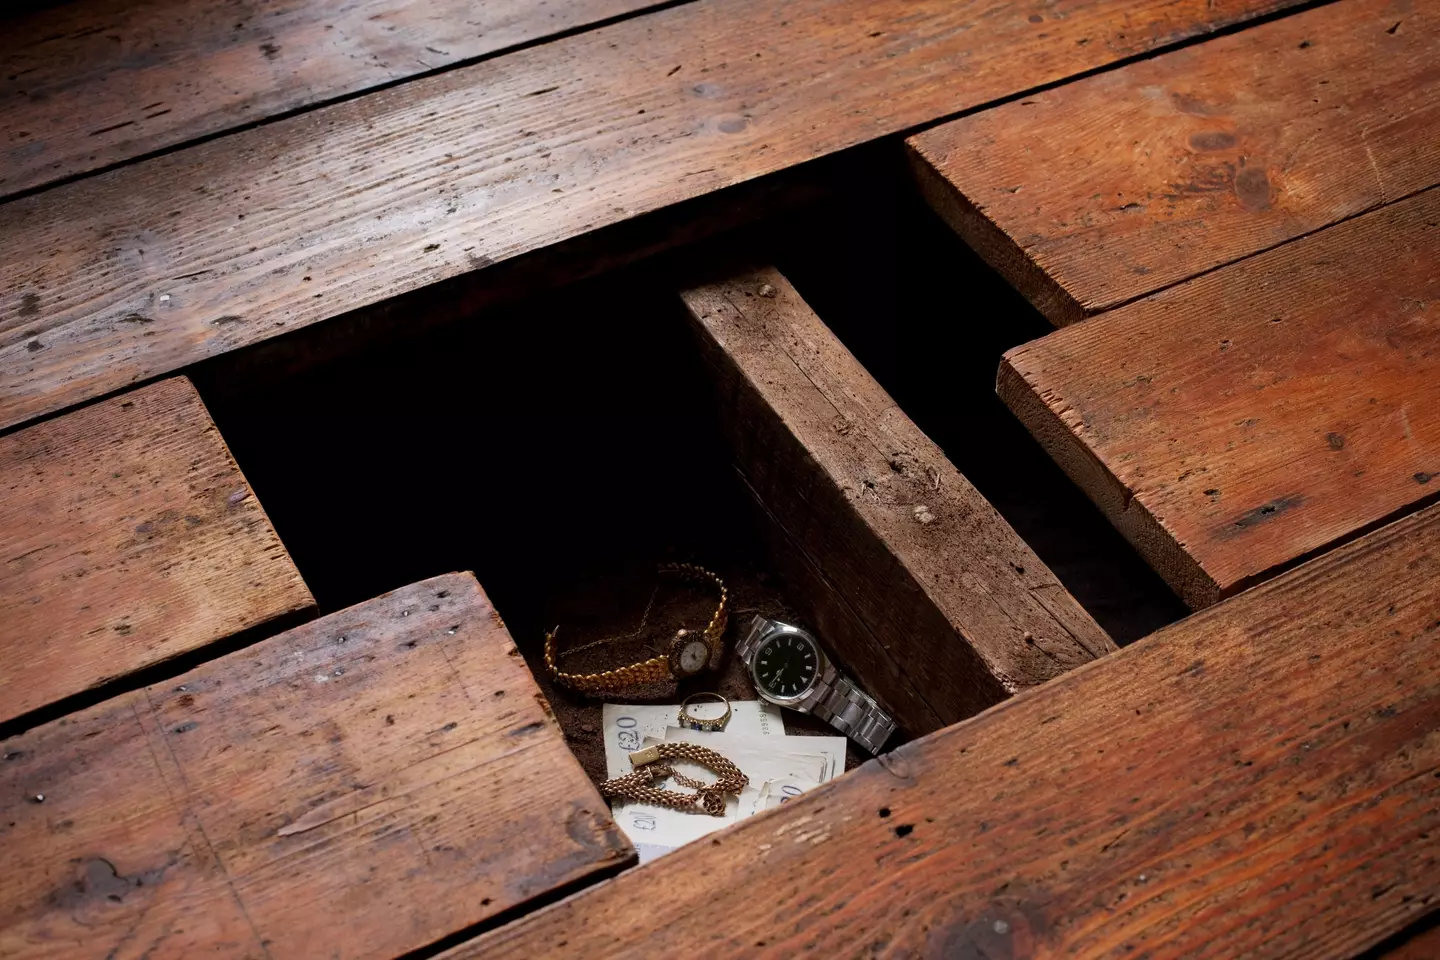 Who knows what could be under the floorboards?